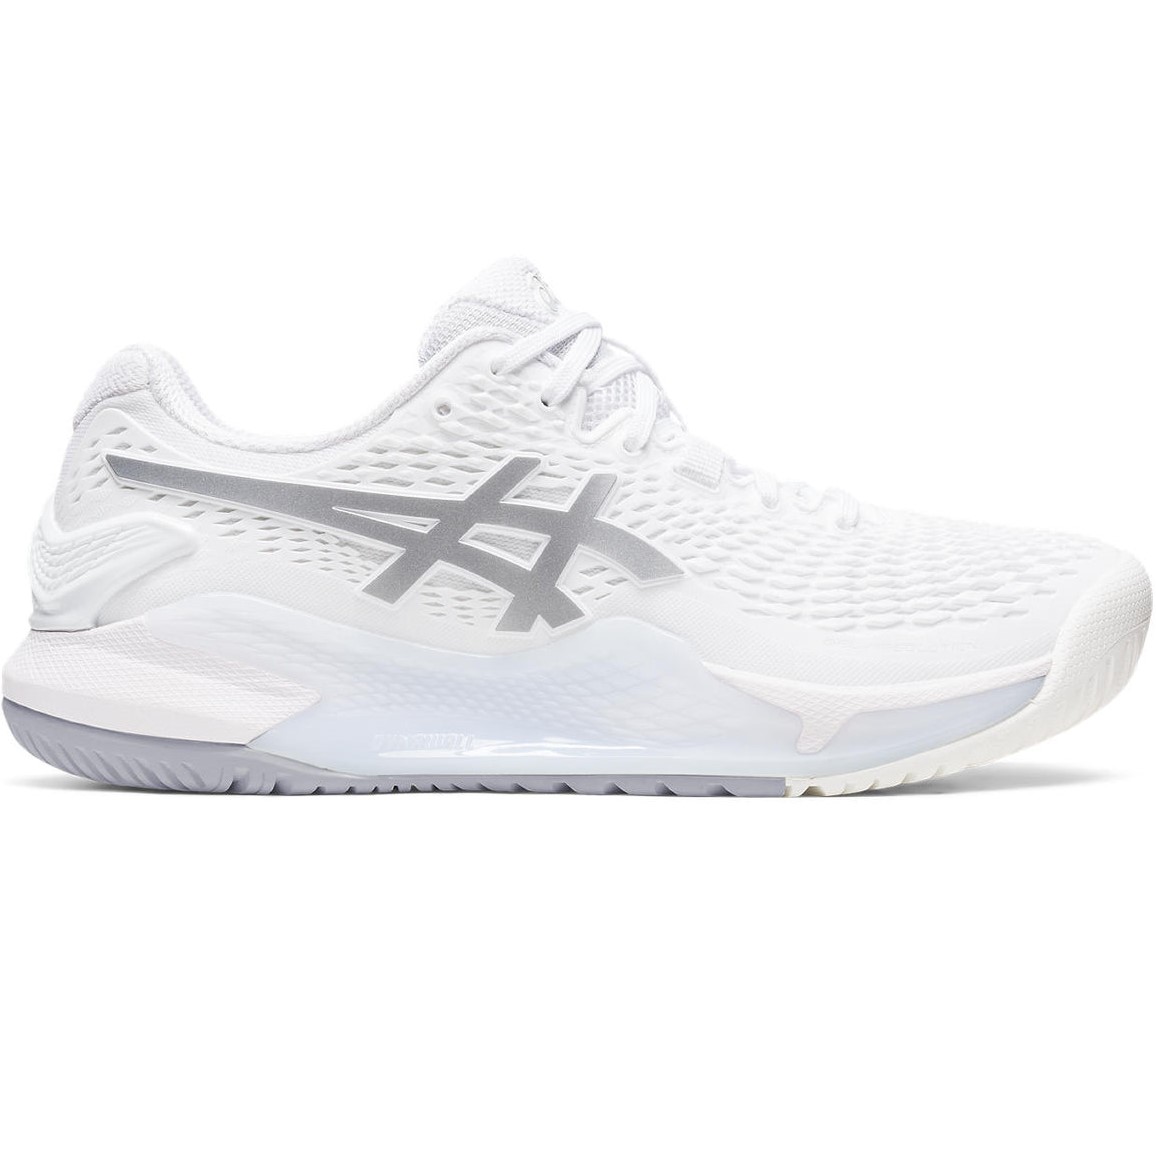 GIÀY CHAY BỘ ASICS NỮ GEL-RESOLUTION 9 WOMENS TENNIS SHOES WHITE PURE SILVER 1042A208-100 6